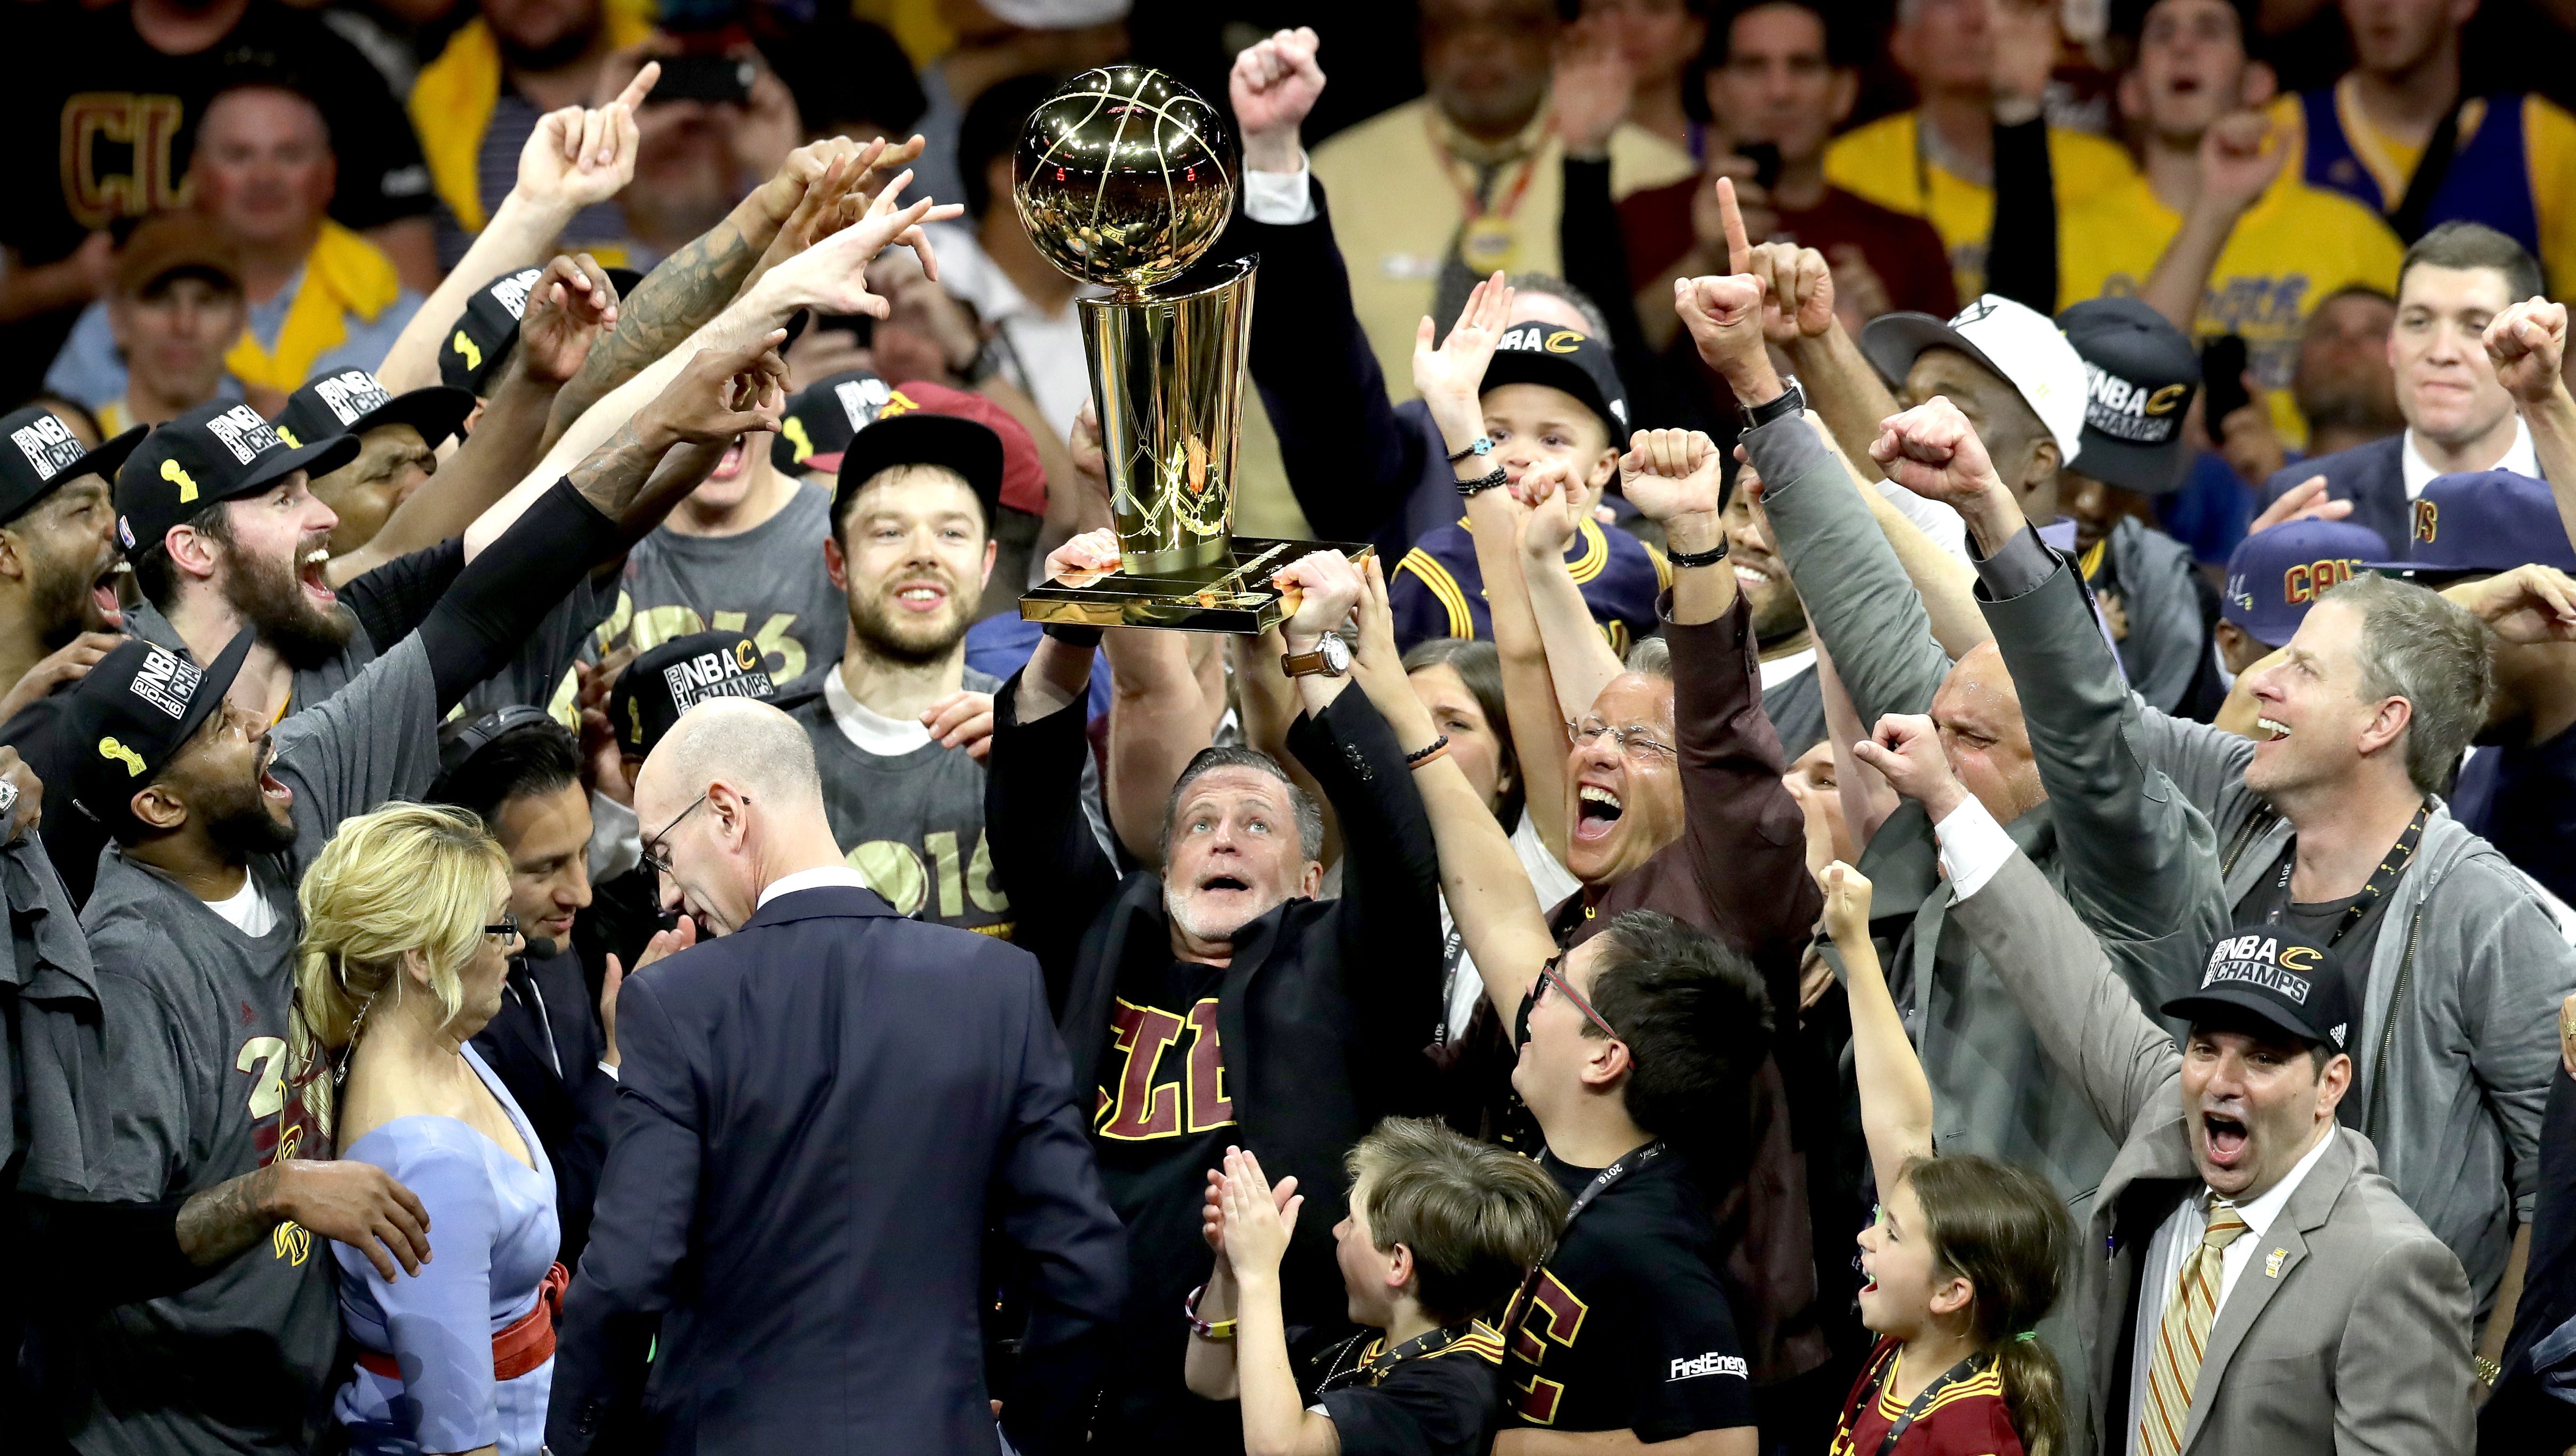 Dan Gilbert after Cavaliers win: 'God loves Cleveland, Ohio'